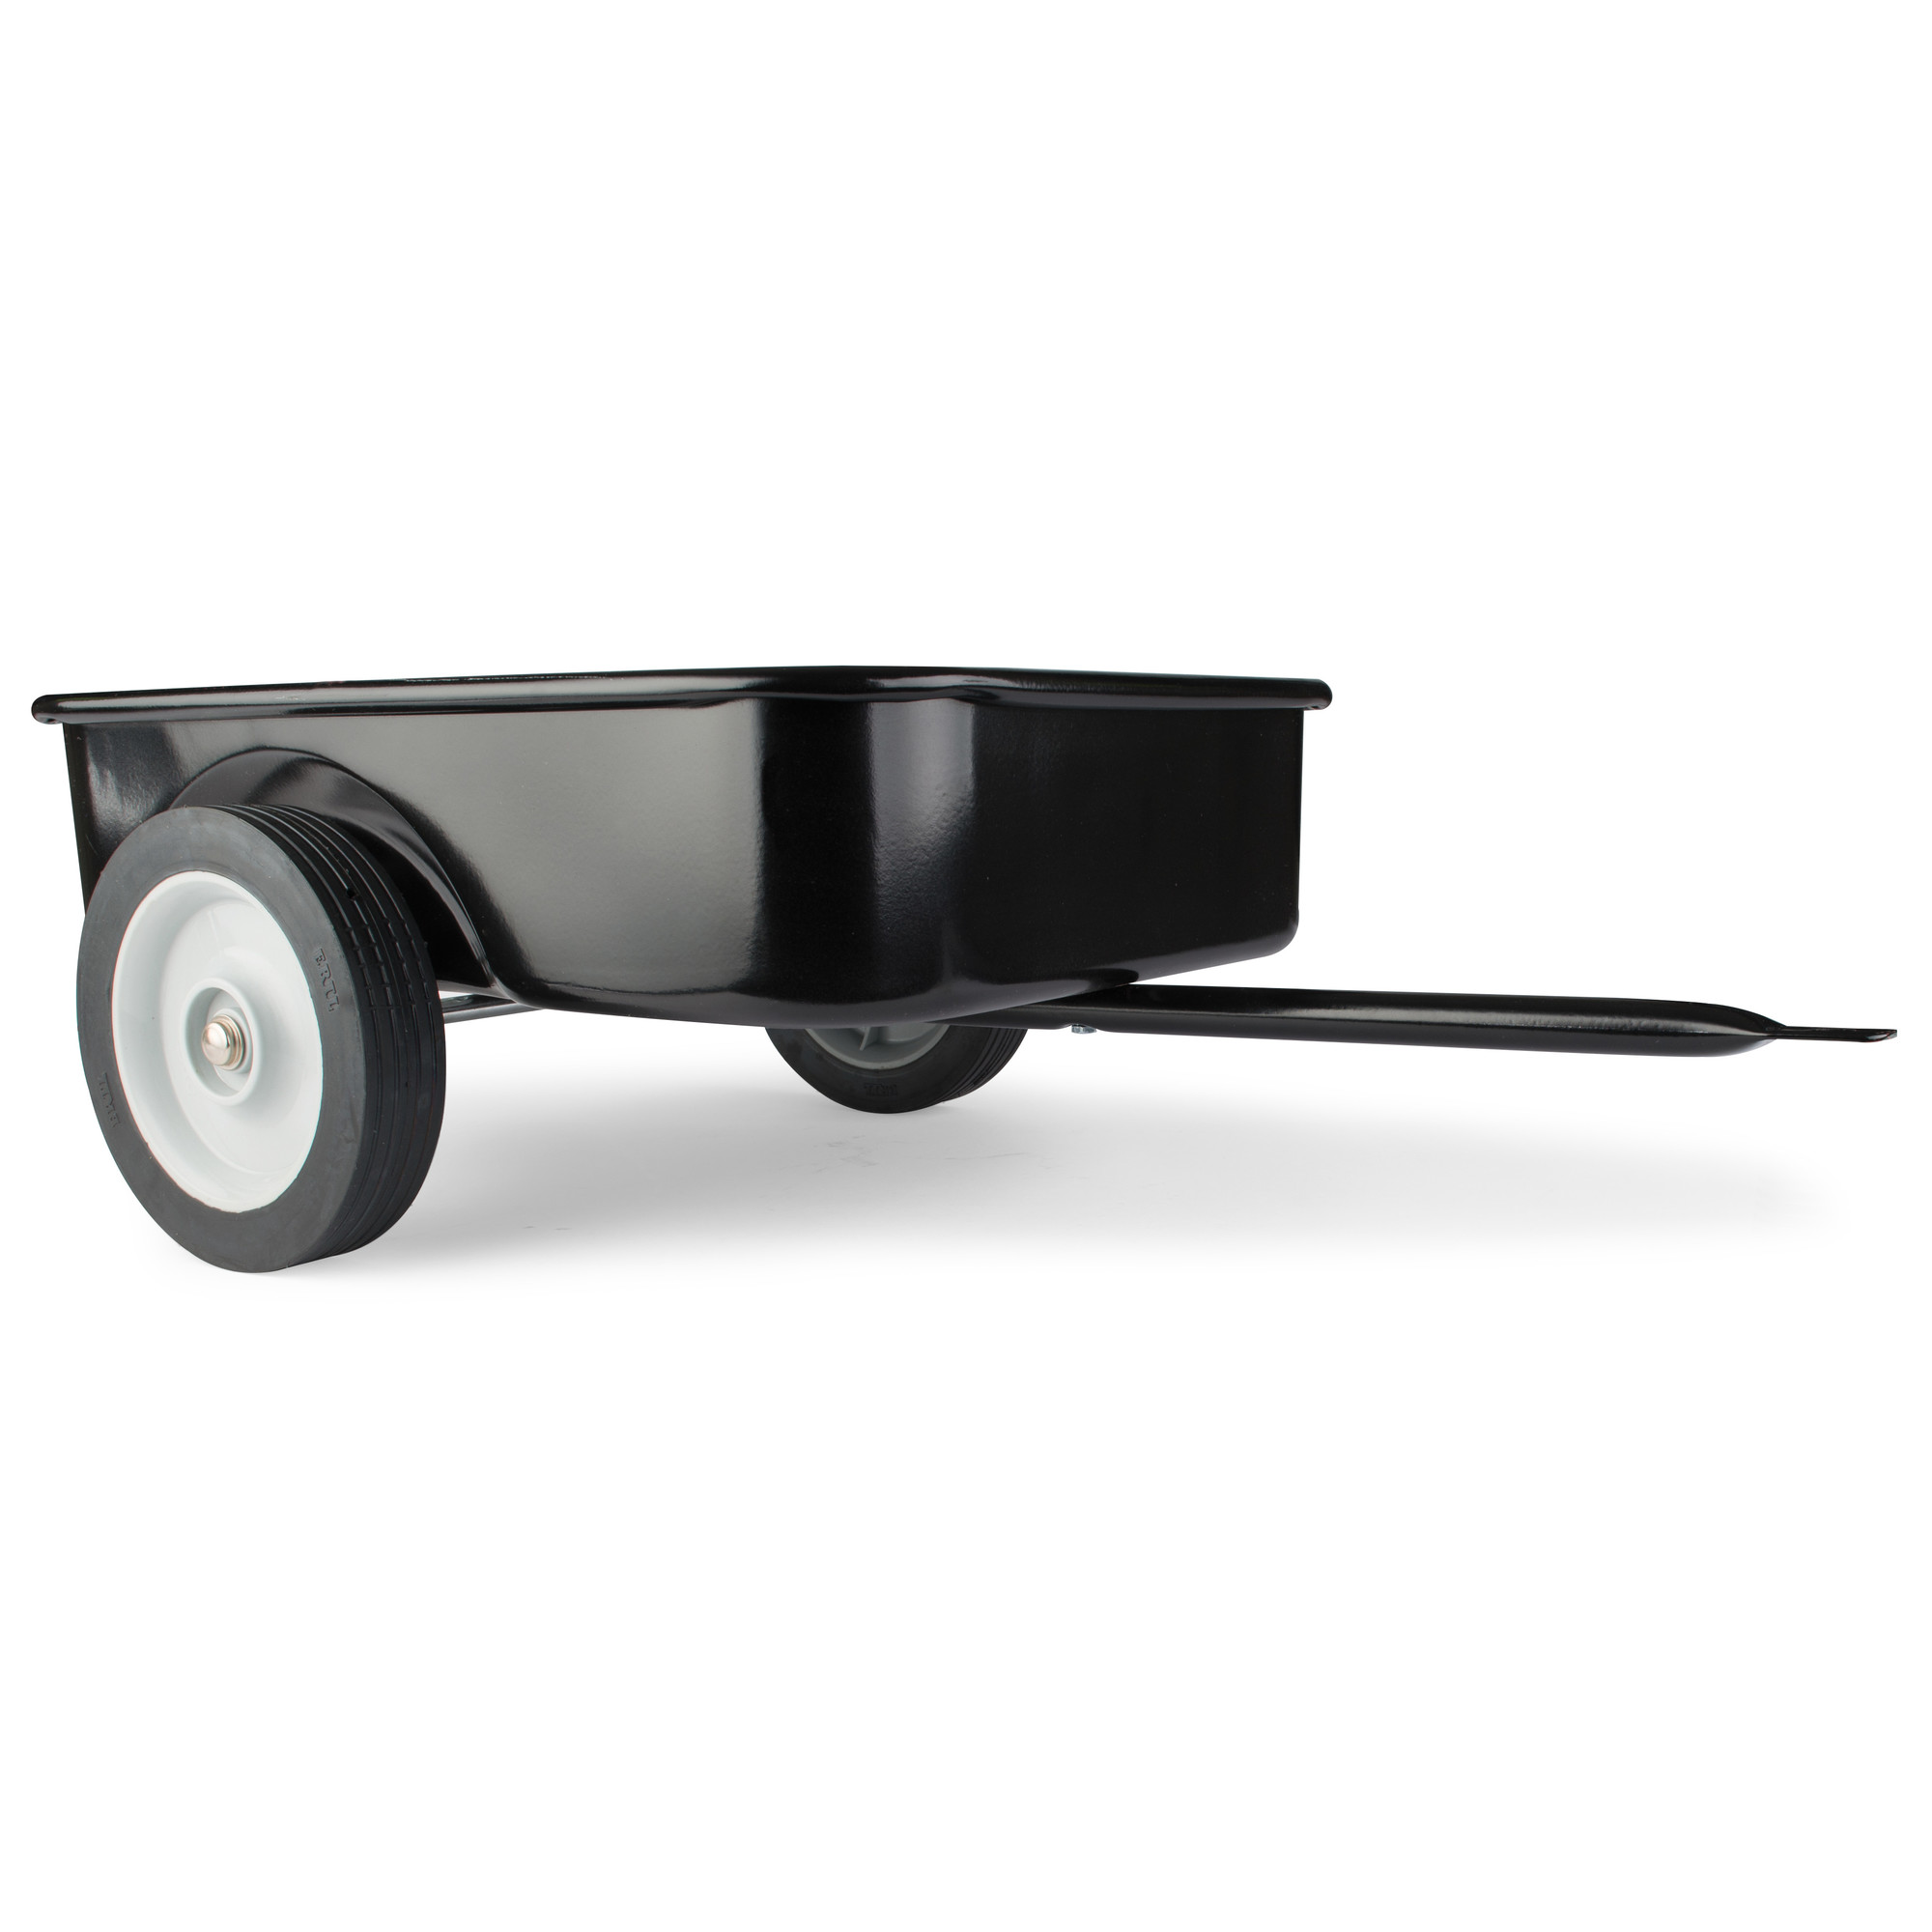 ERTL Steel Trailer Pull Behind for Pedal Tractors - image 1 of 3